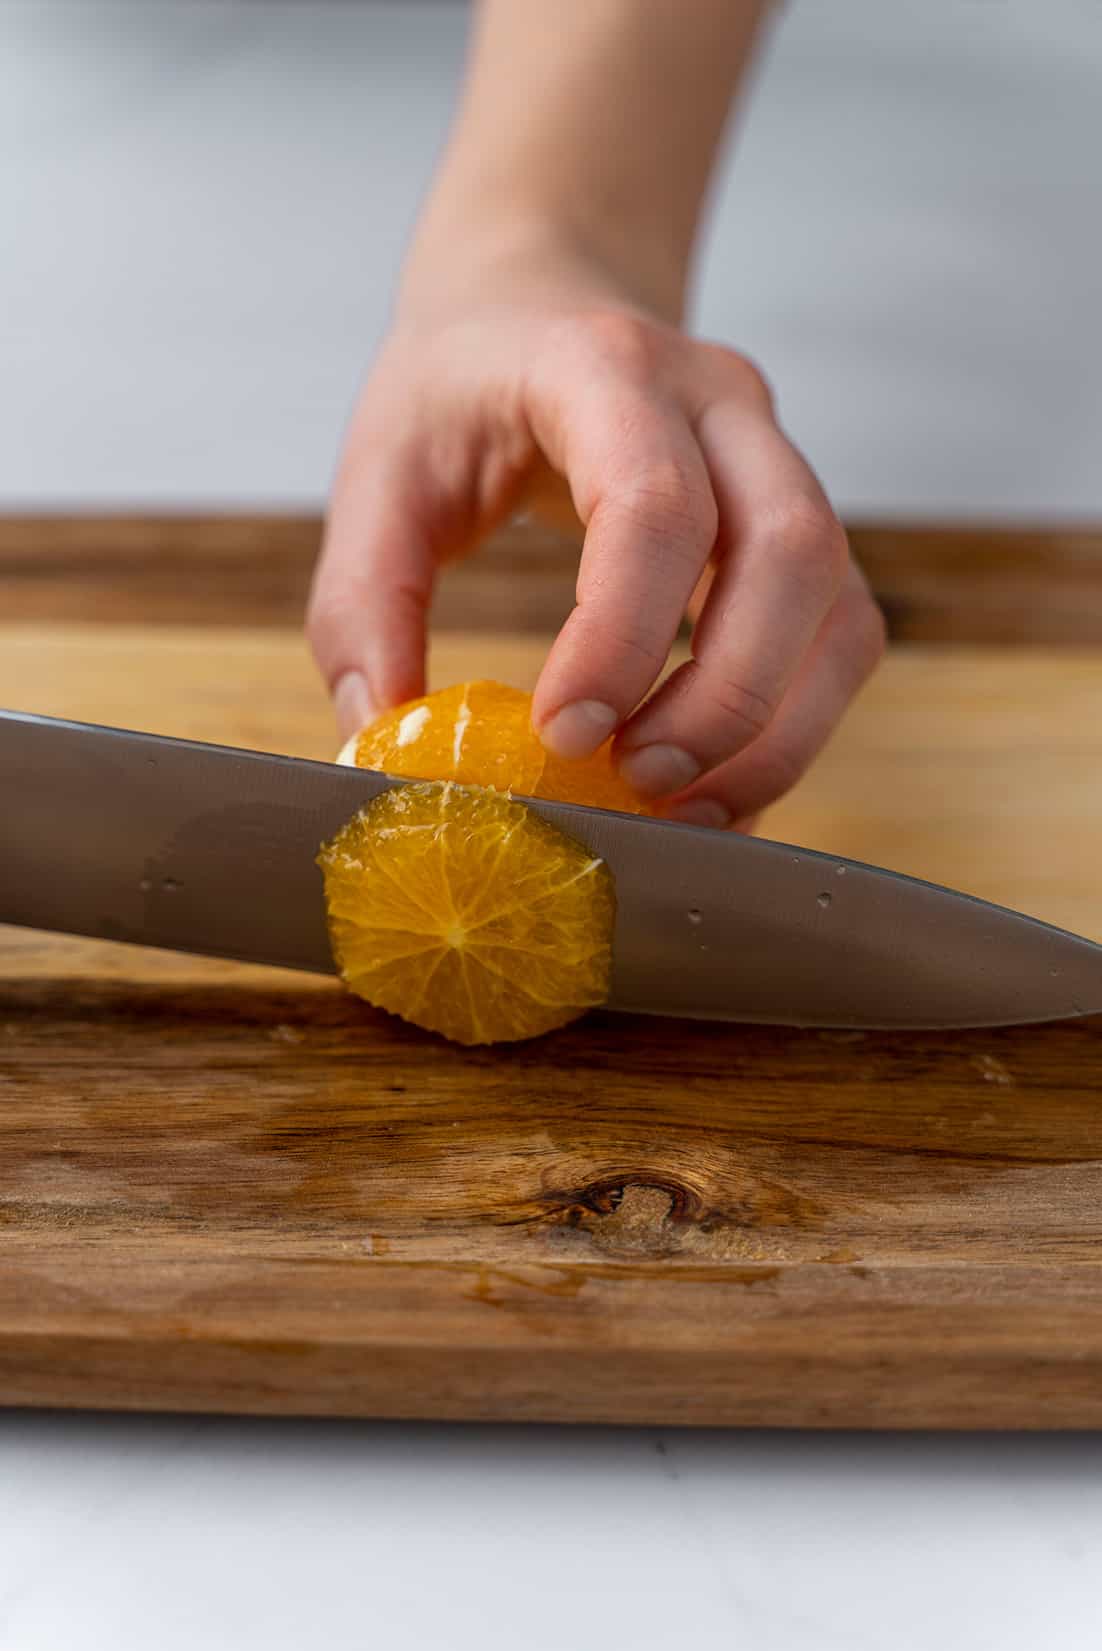 slicing an orange with a knife 